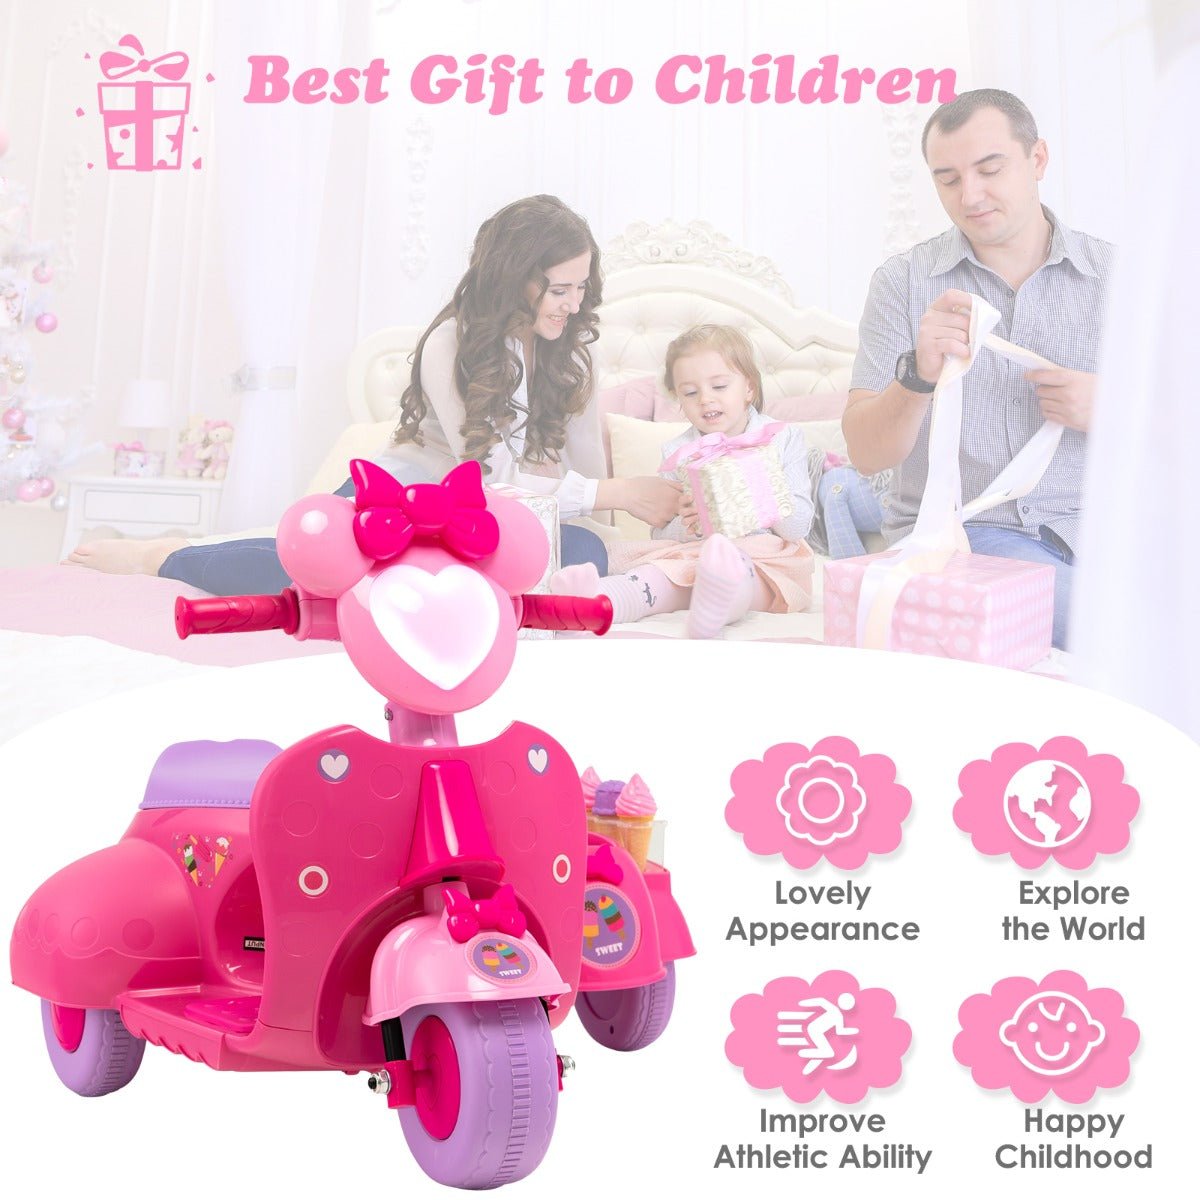 Kids Ride-On Motorbike with Pink Sidecar: Ready for Exciting Journeys